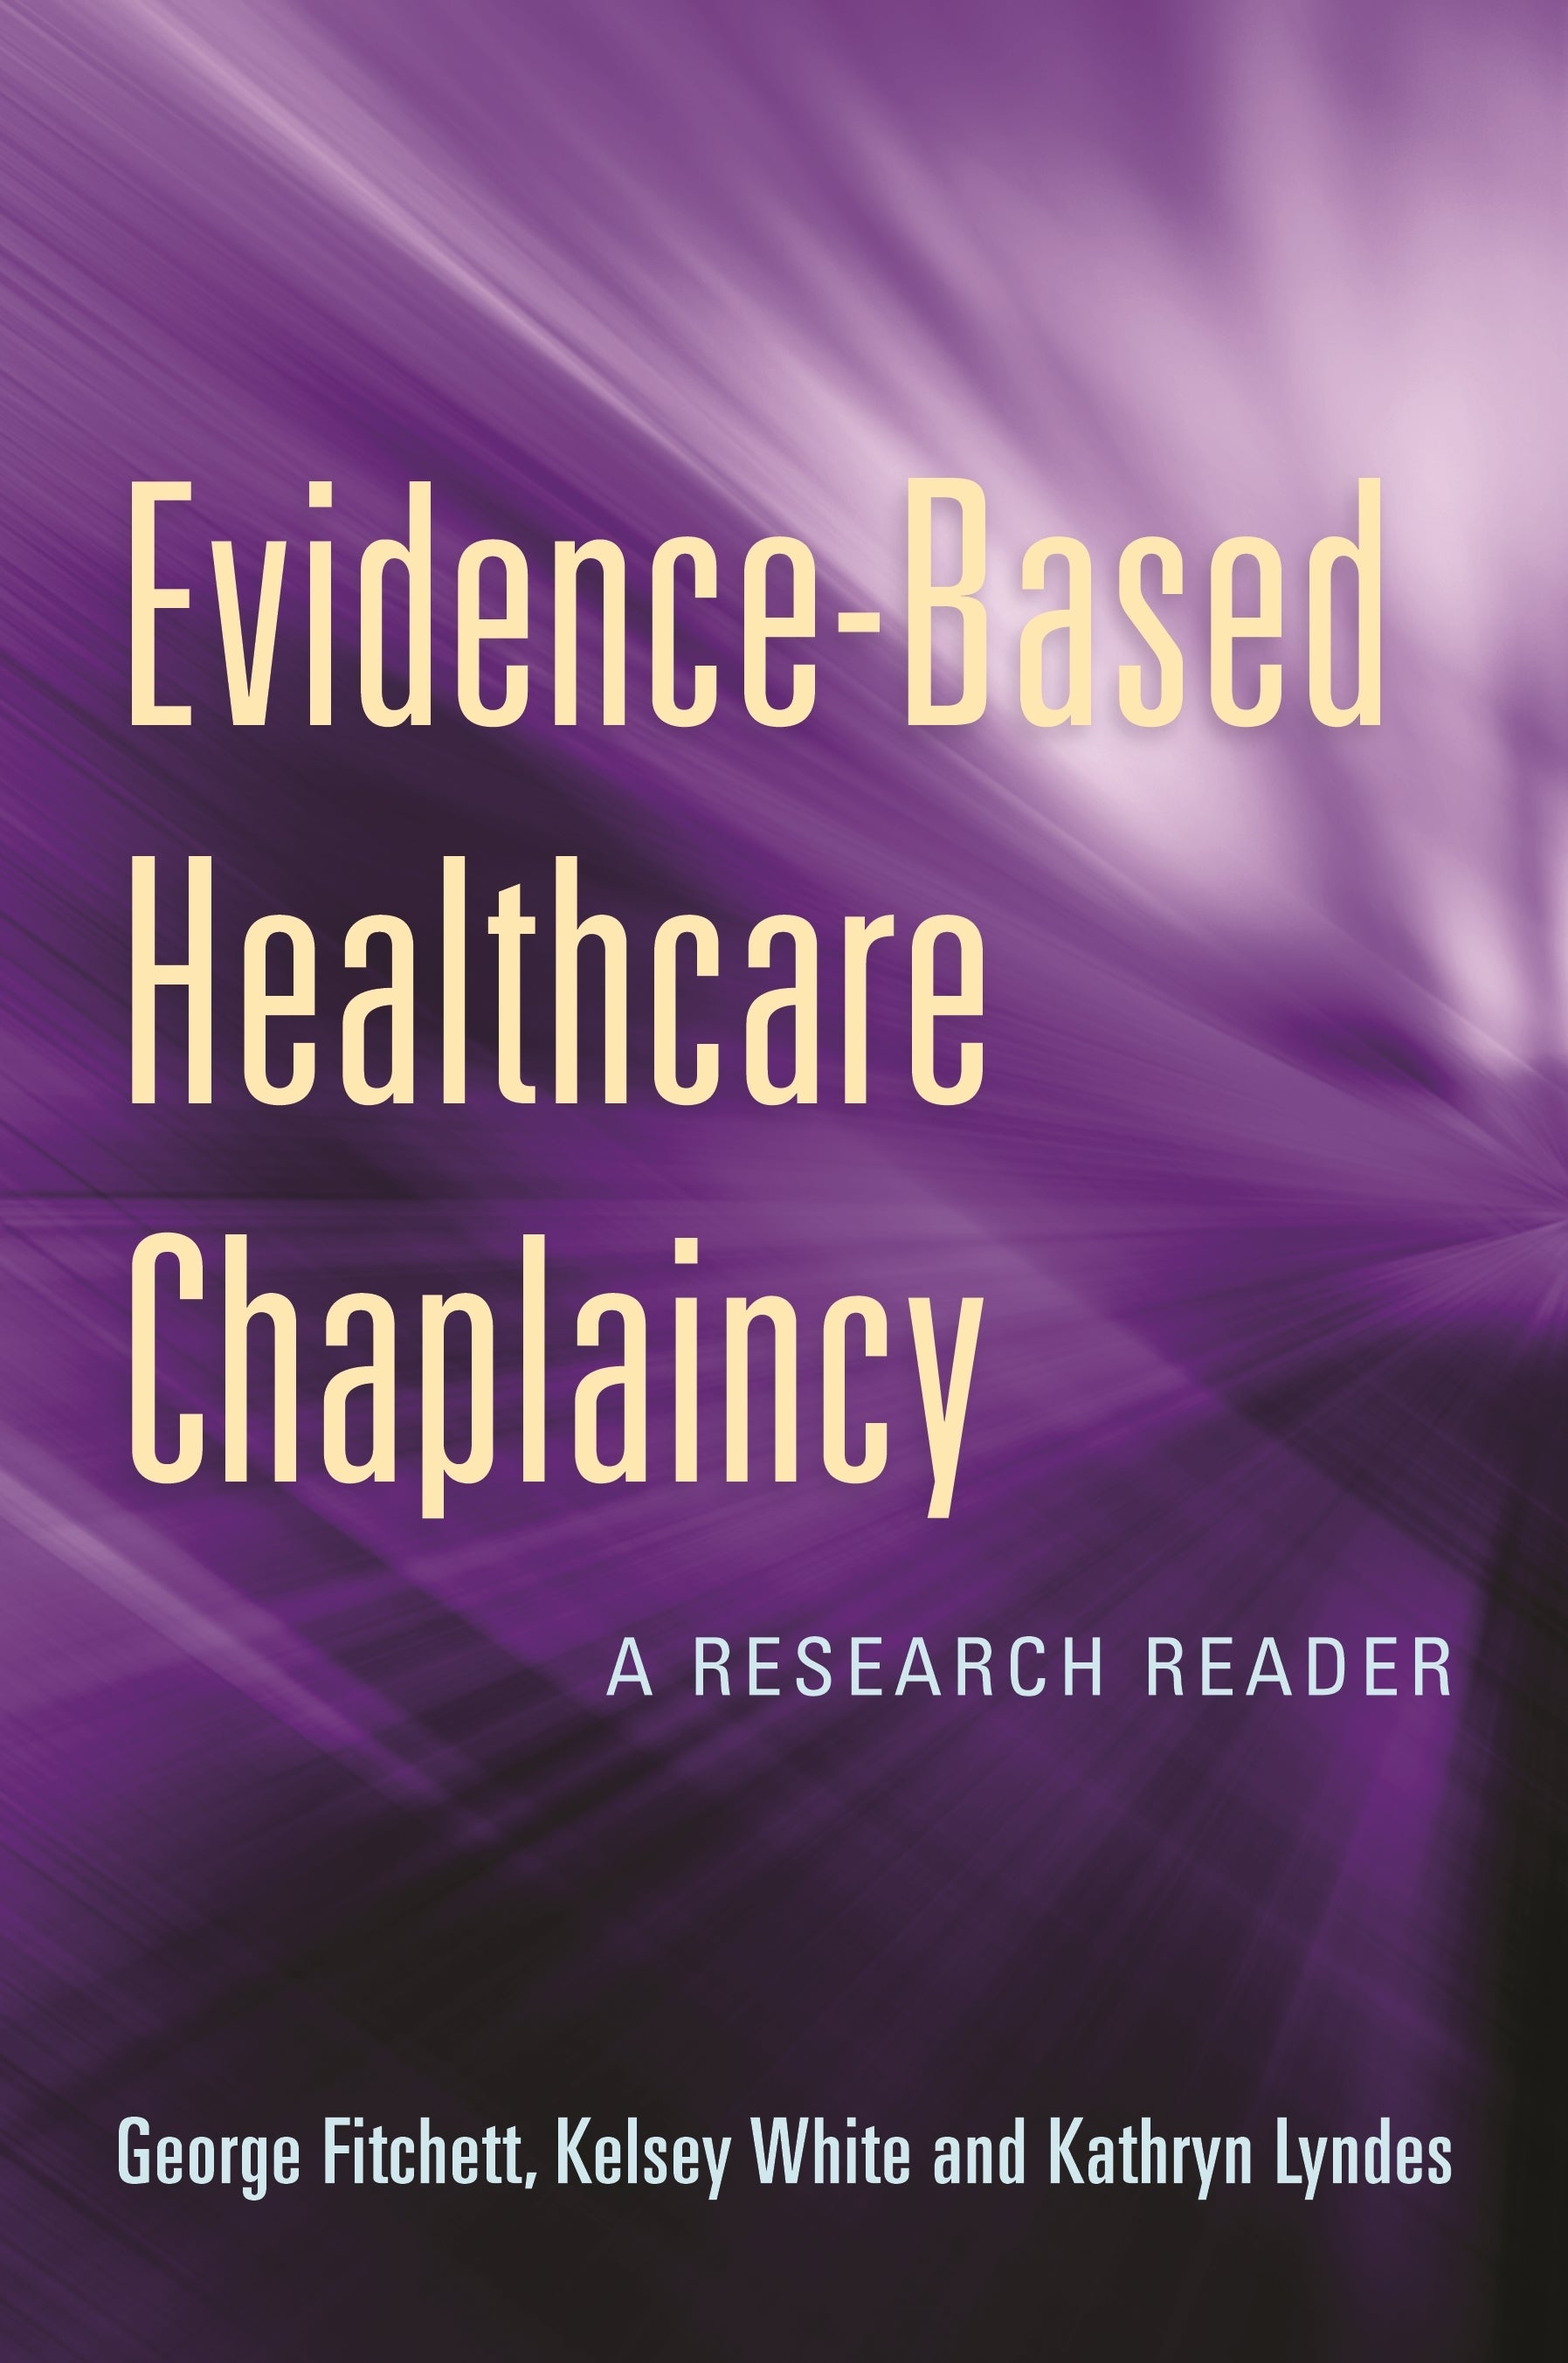 Evidence-Based Healthcare Chaplaincy by George Fitchett, Kelsey White, Kathryn Lyndes, No Author Listed